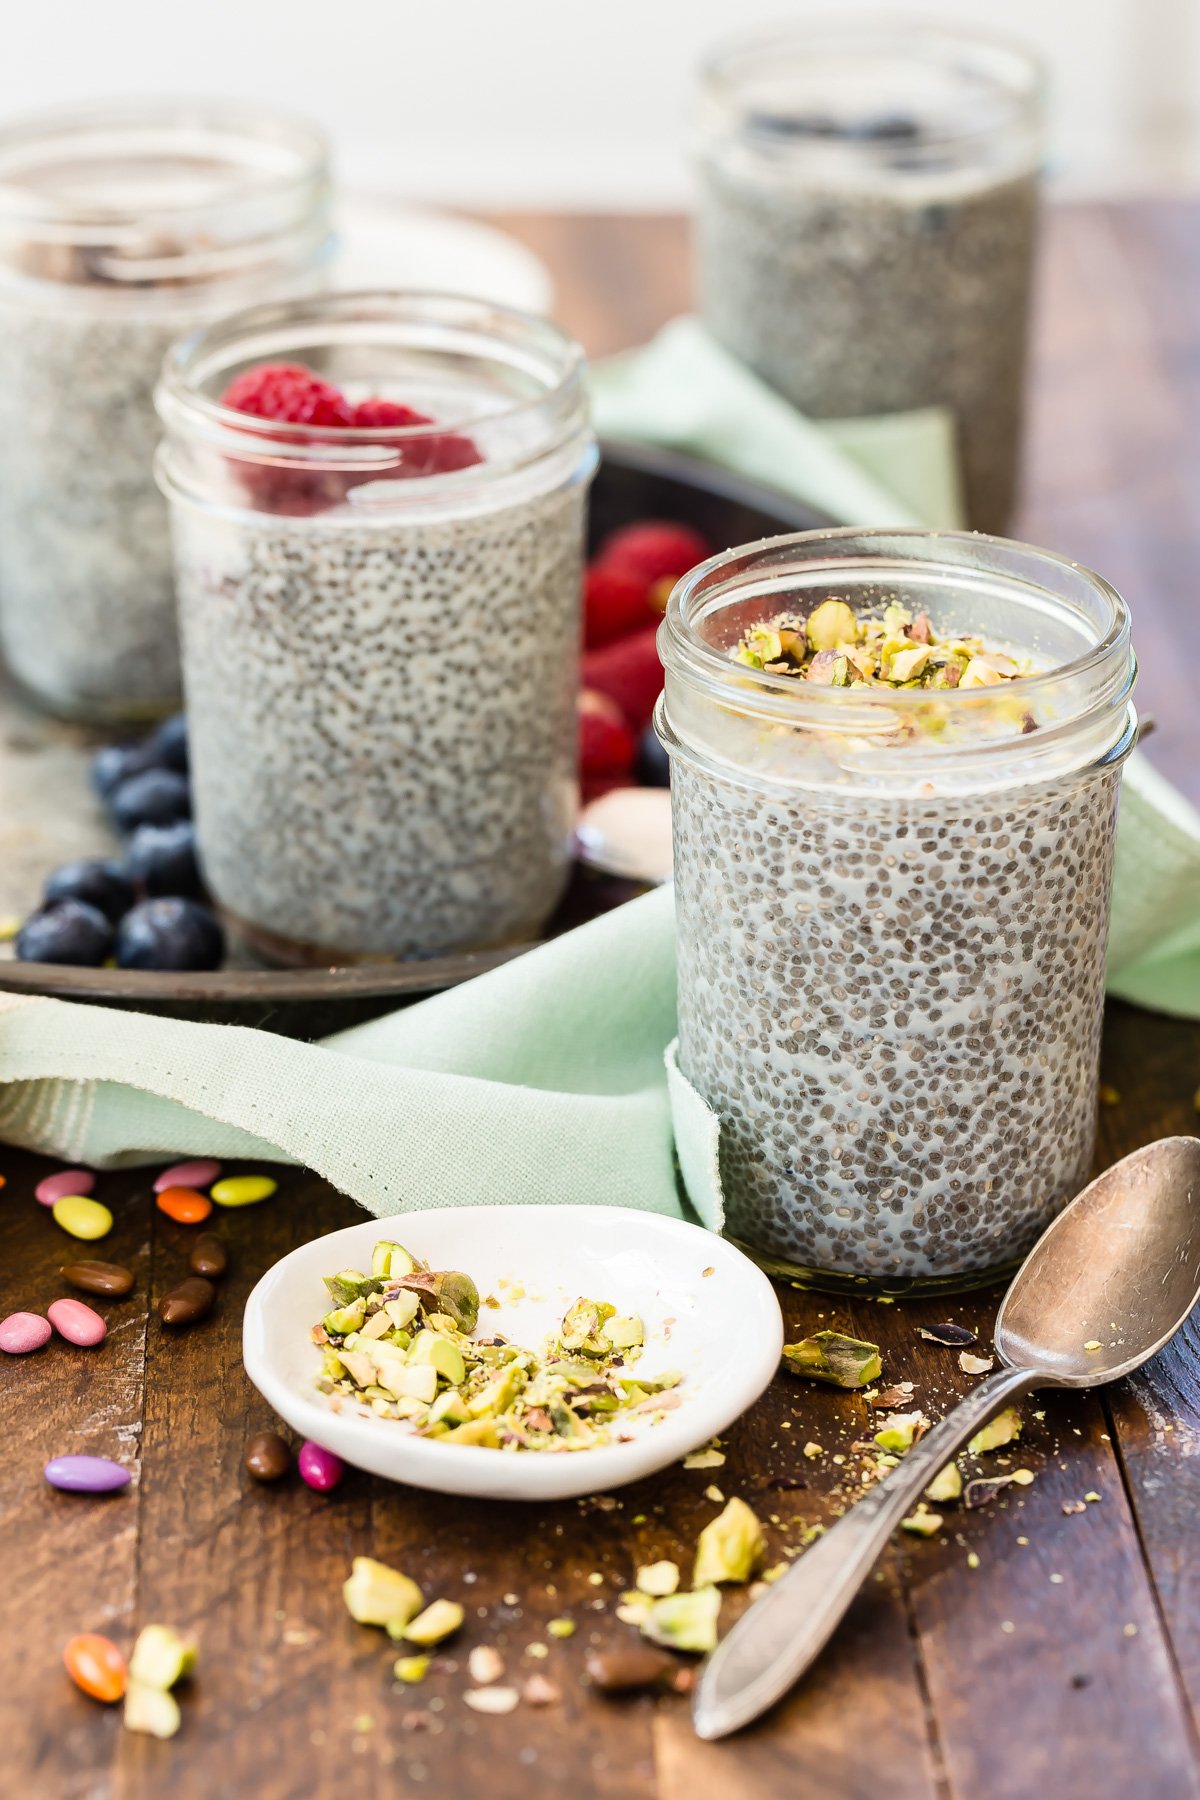 Vanilla Chia Seed Pudding from Weelicious.com